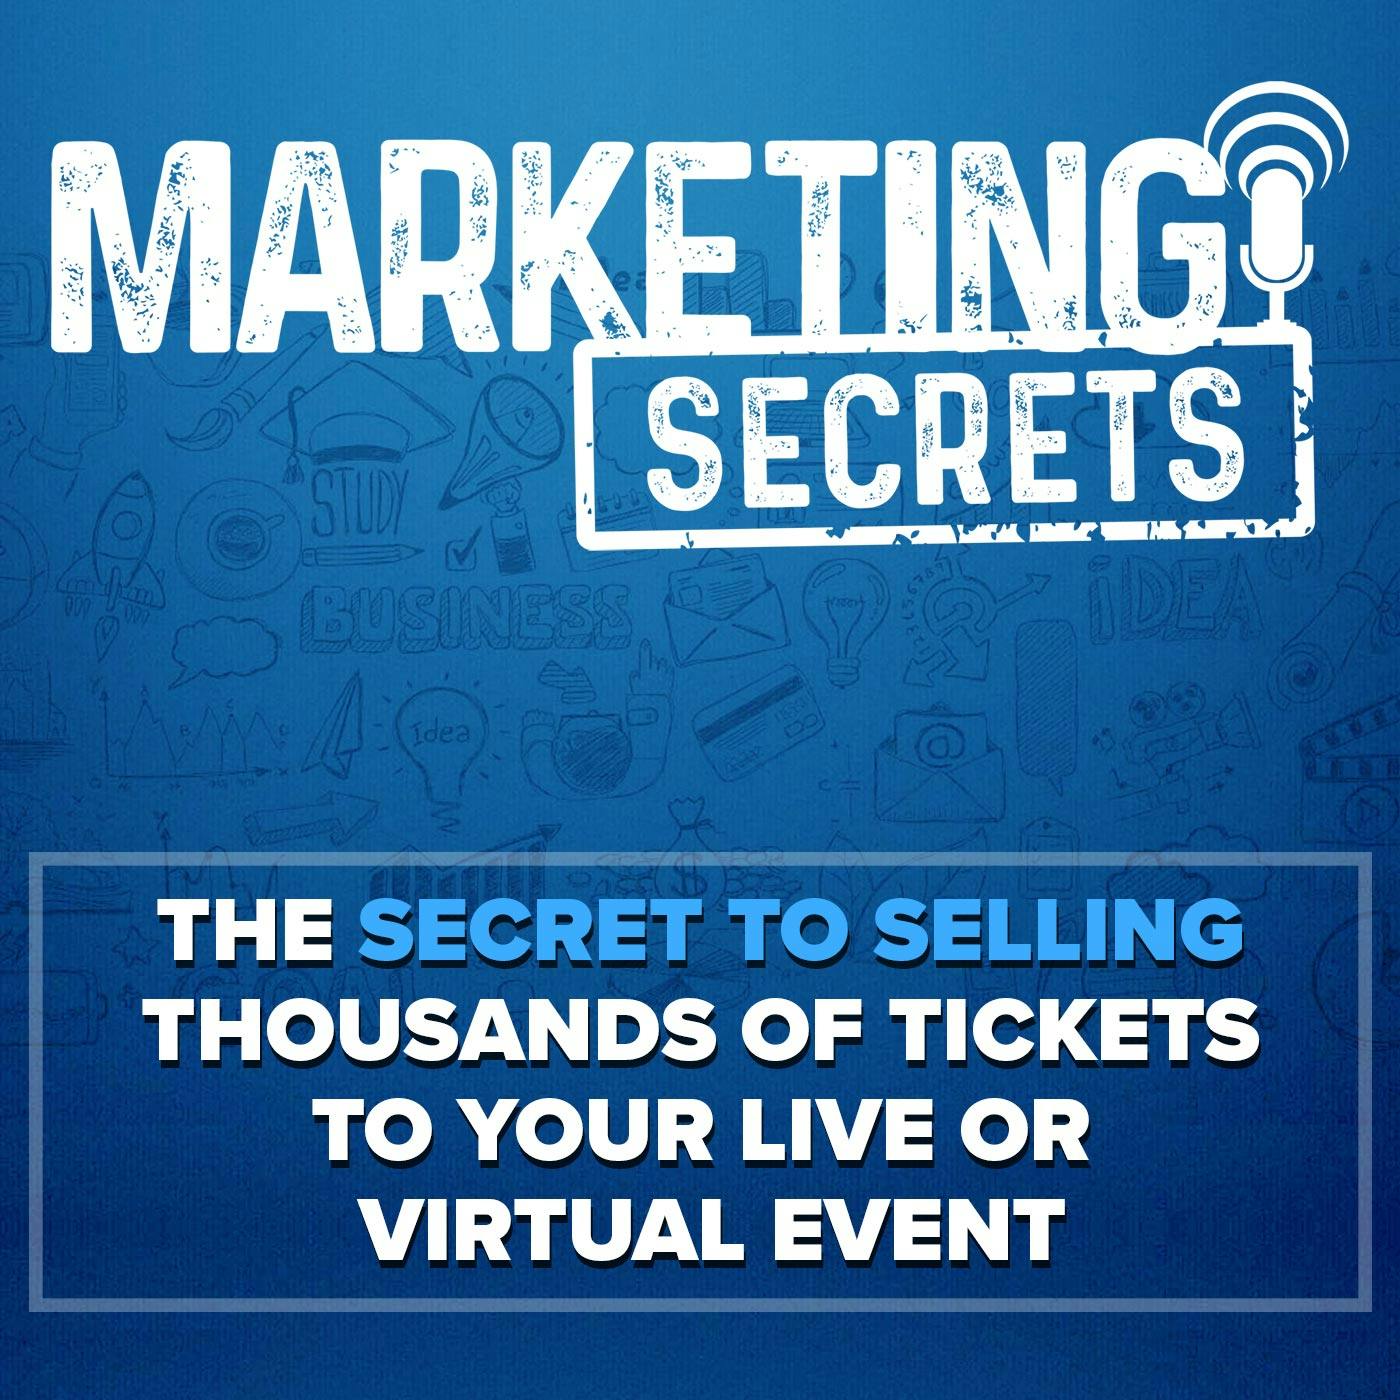 The Secret to Selling Thousands of Tickets to Your Live or Virtual Event